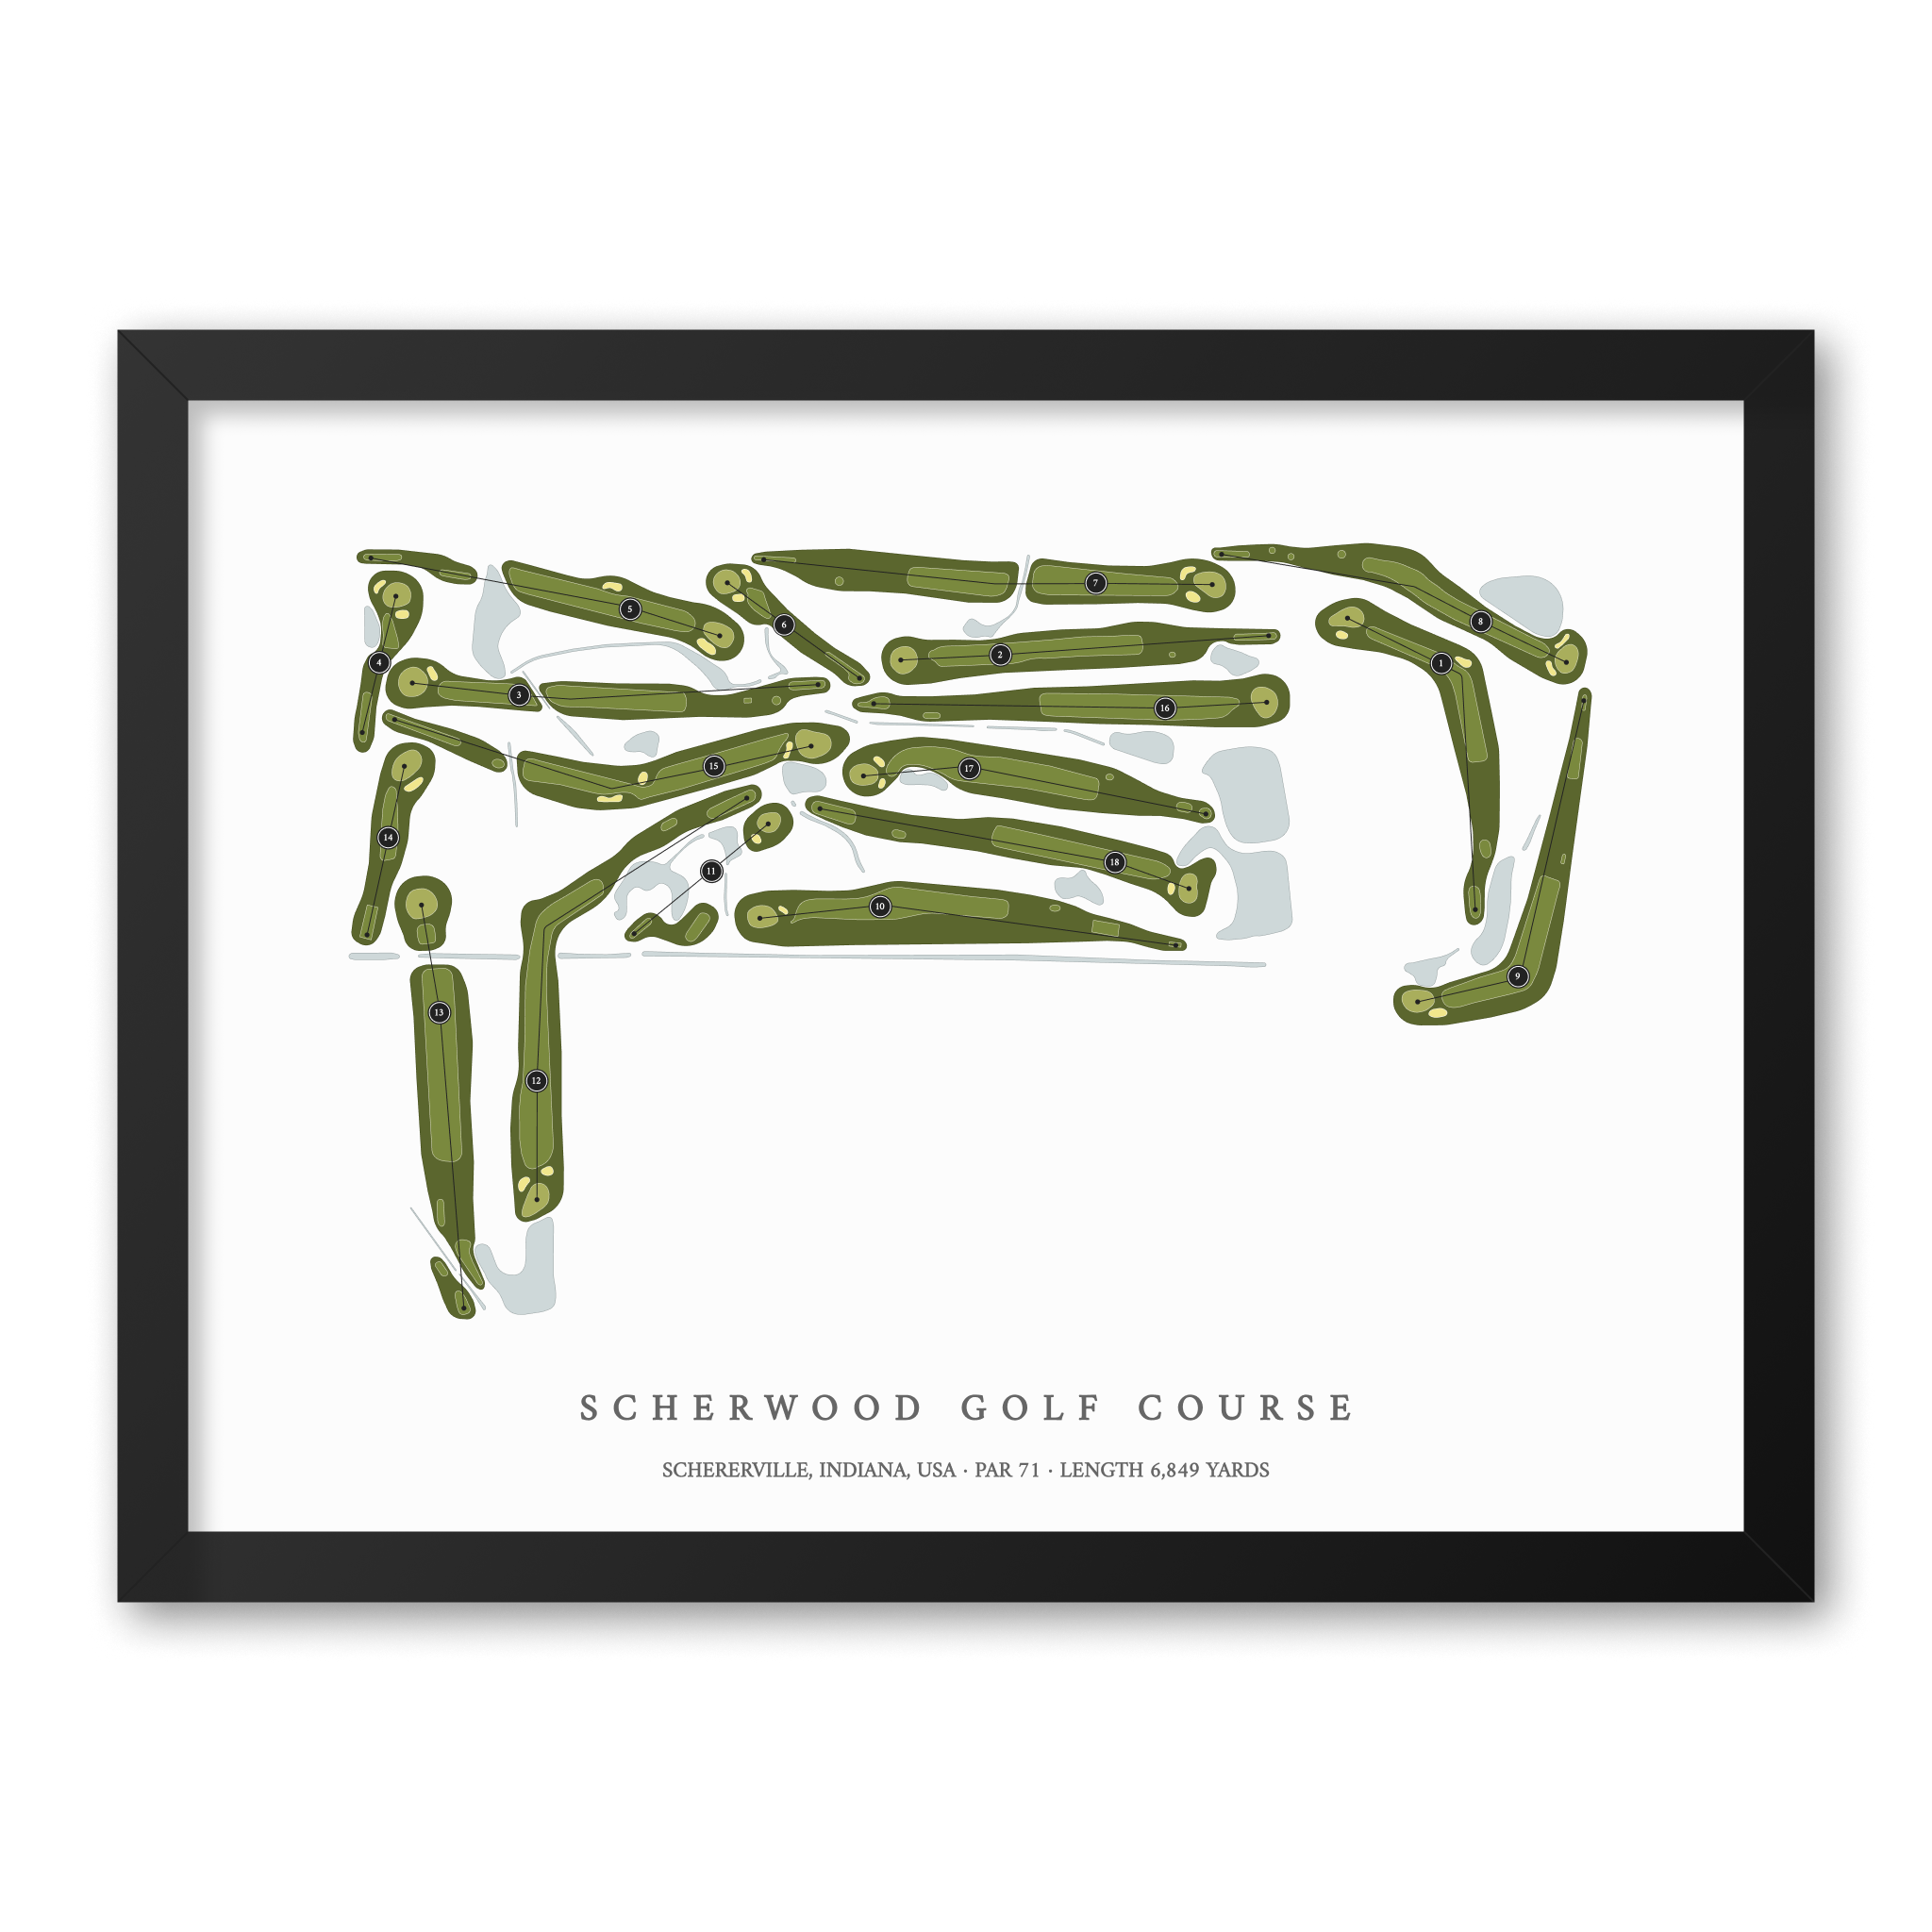 Scherwood Golf Course | Golf Course Map | Black Frame With Hole Numbers #hole numbers_yes